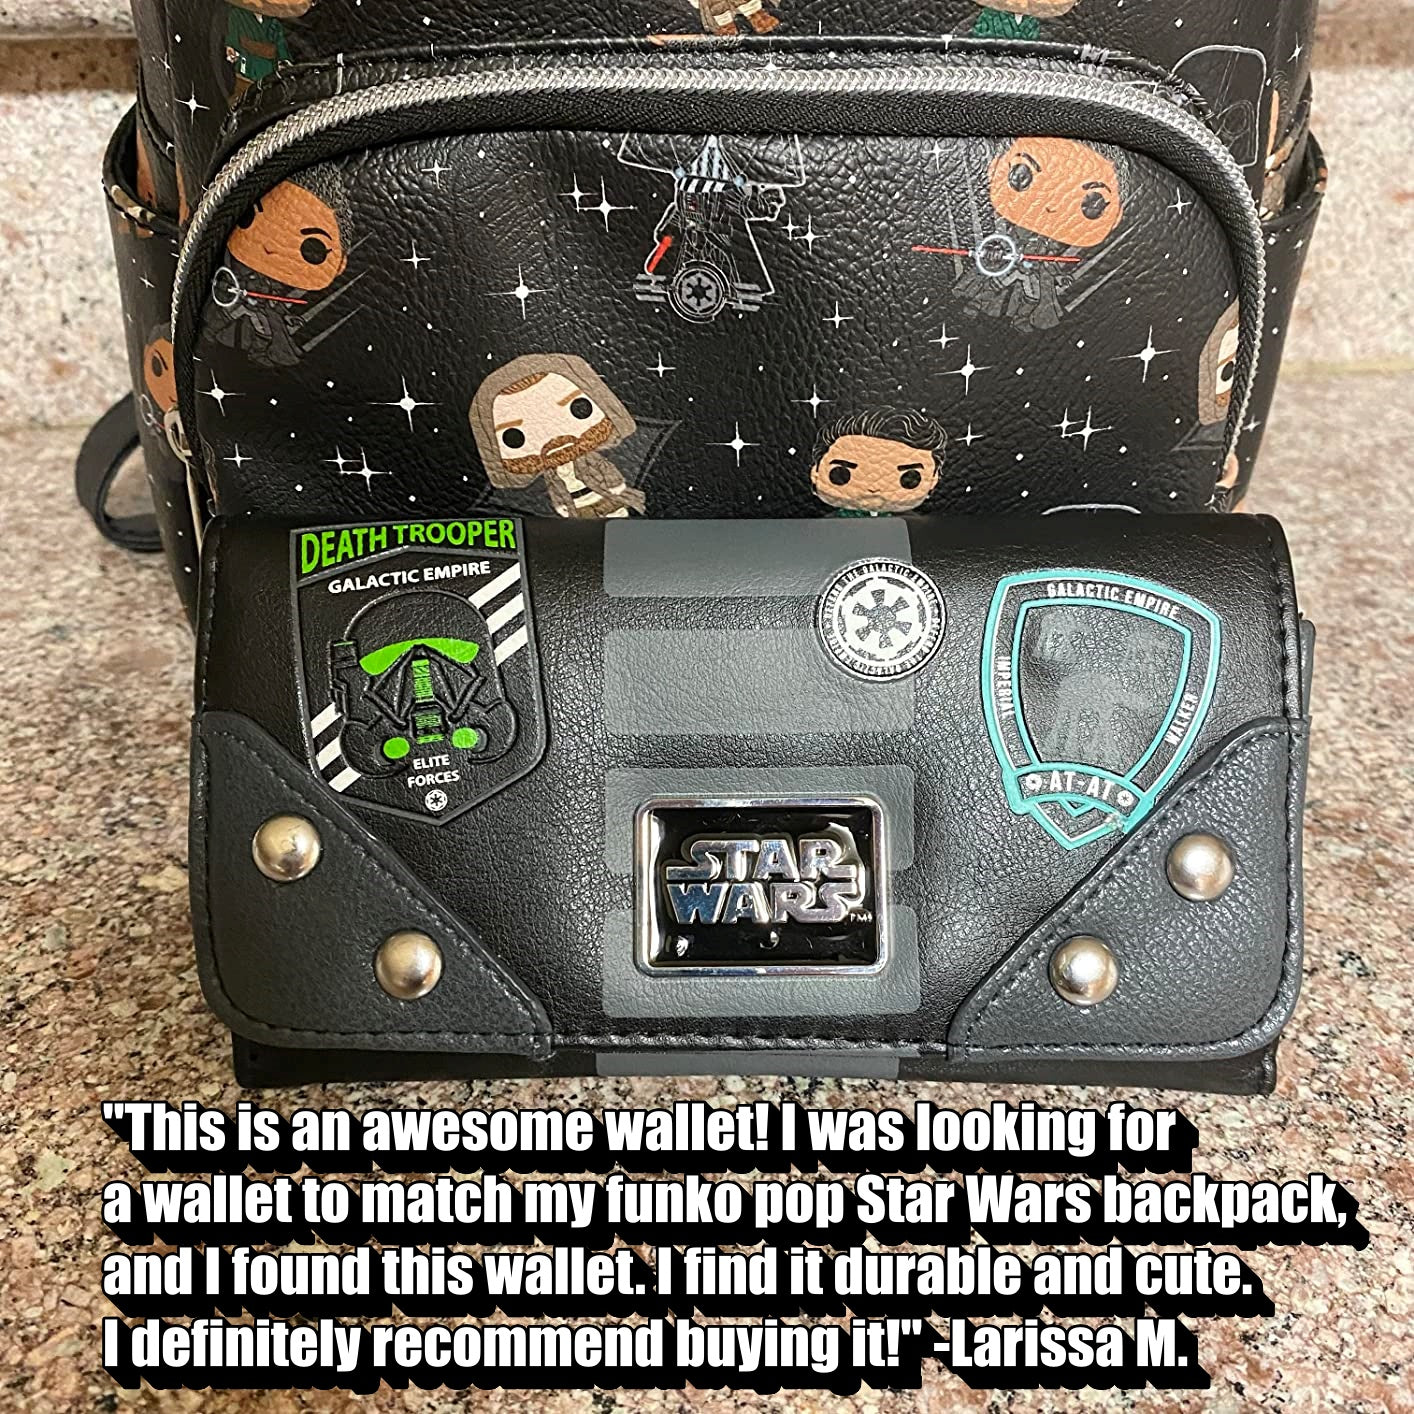 Satisfied fan showing off their purchased Star Wars Rogue One themed wallet.